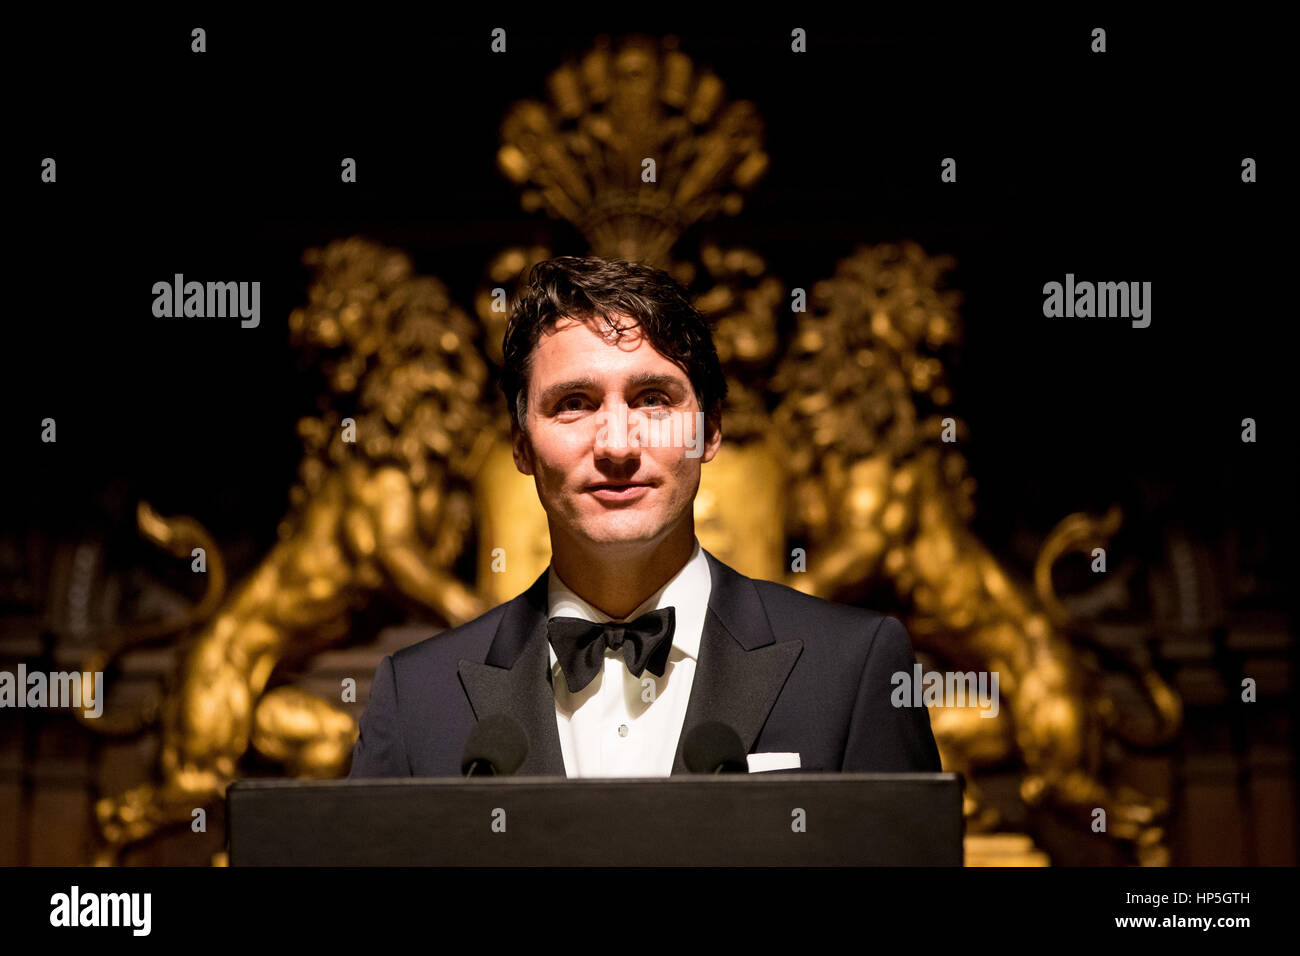 The Canadian Prime Minister Justin Trudeau speaks during the annual 'Matthiae Dinner' in Hamburg, Germany, 17 February 2017. Trudeau and German Foreign Minister Gabriel are guests of honour at the world's oldest banquet. The governors of the city of Hamburg have held the feast since 1356. Photo: Christian Charisius/dpa Stock Photo